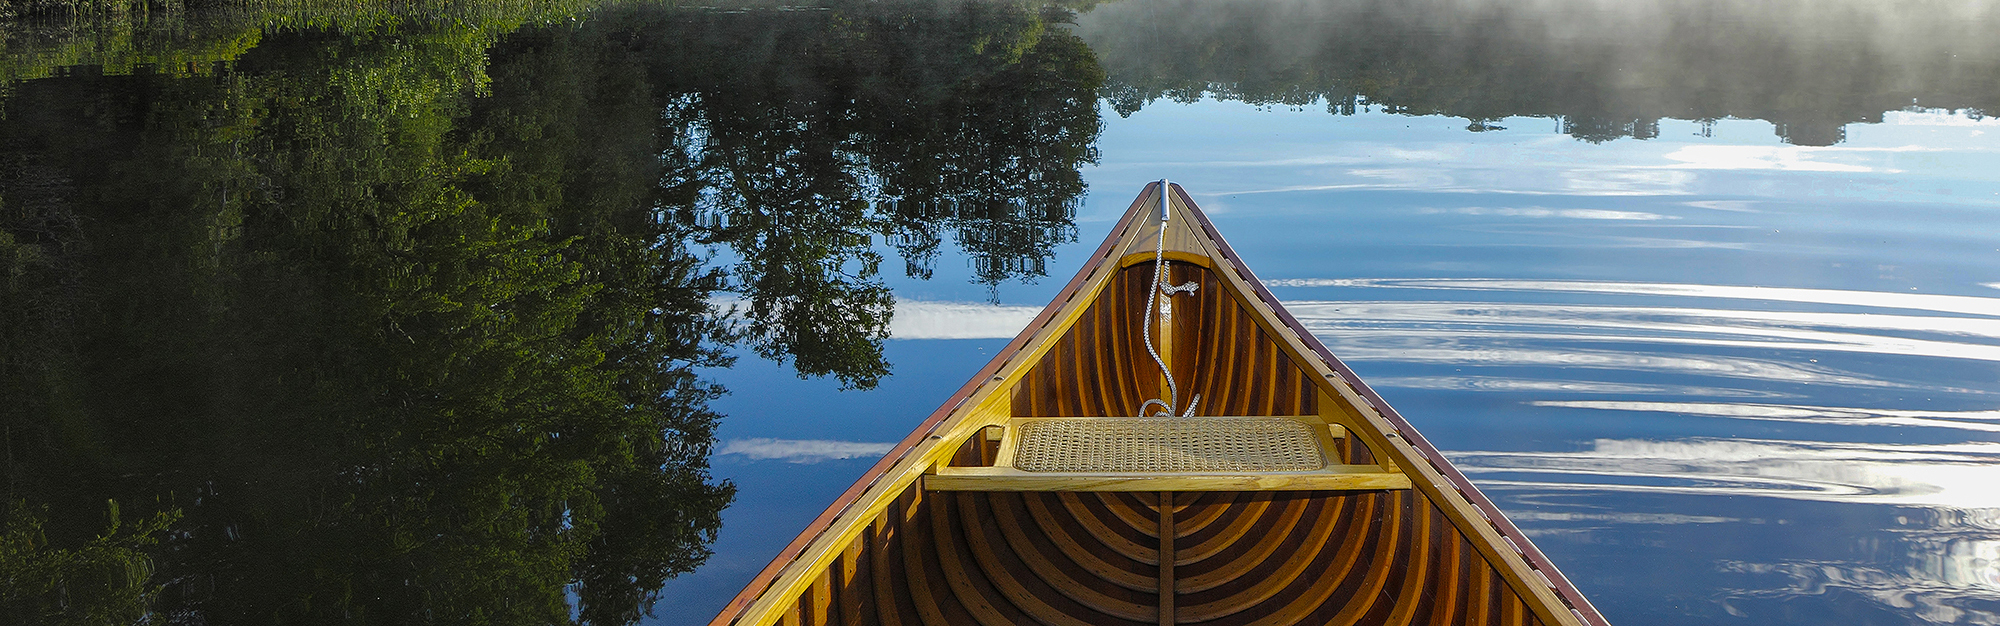 Photo of a canoe on water